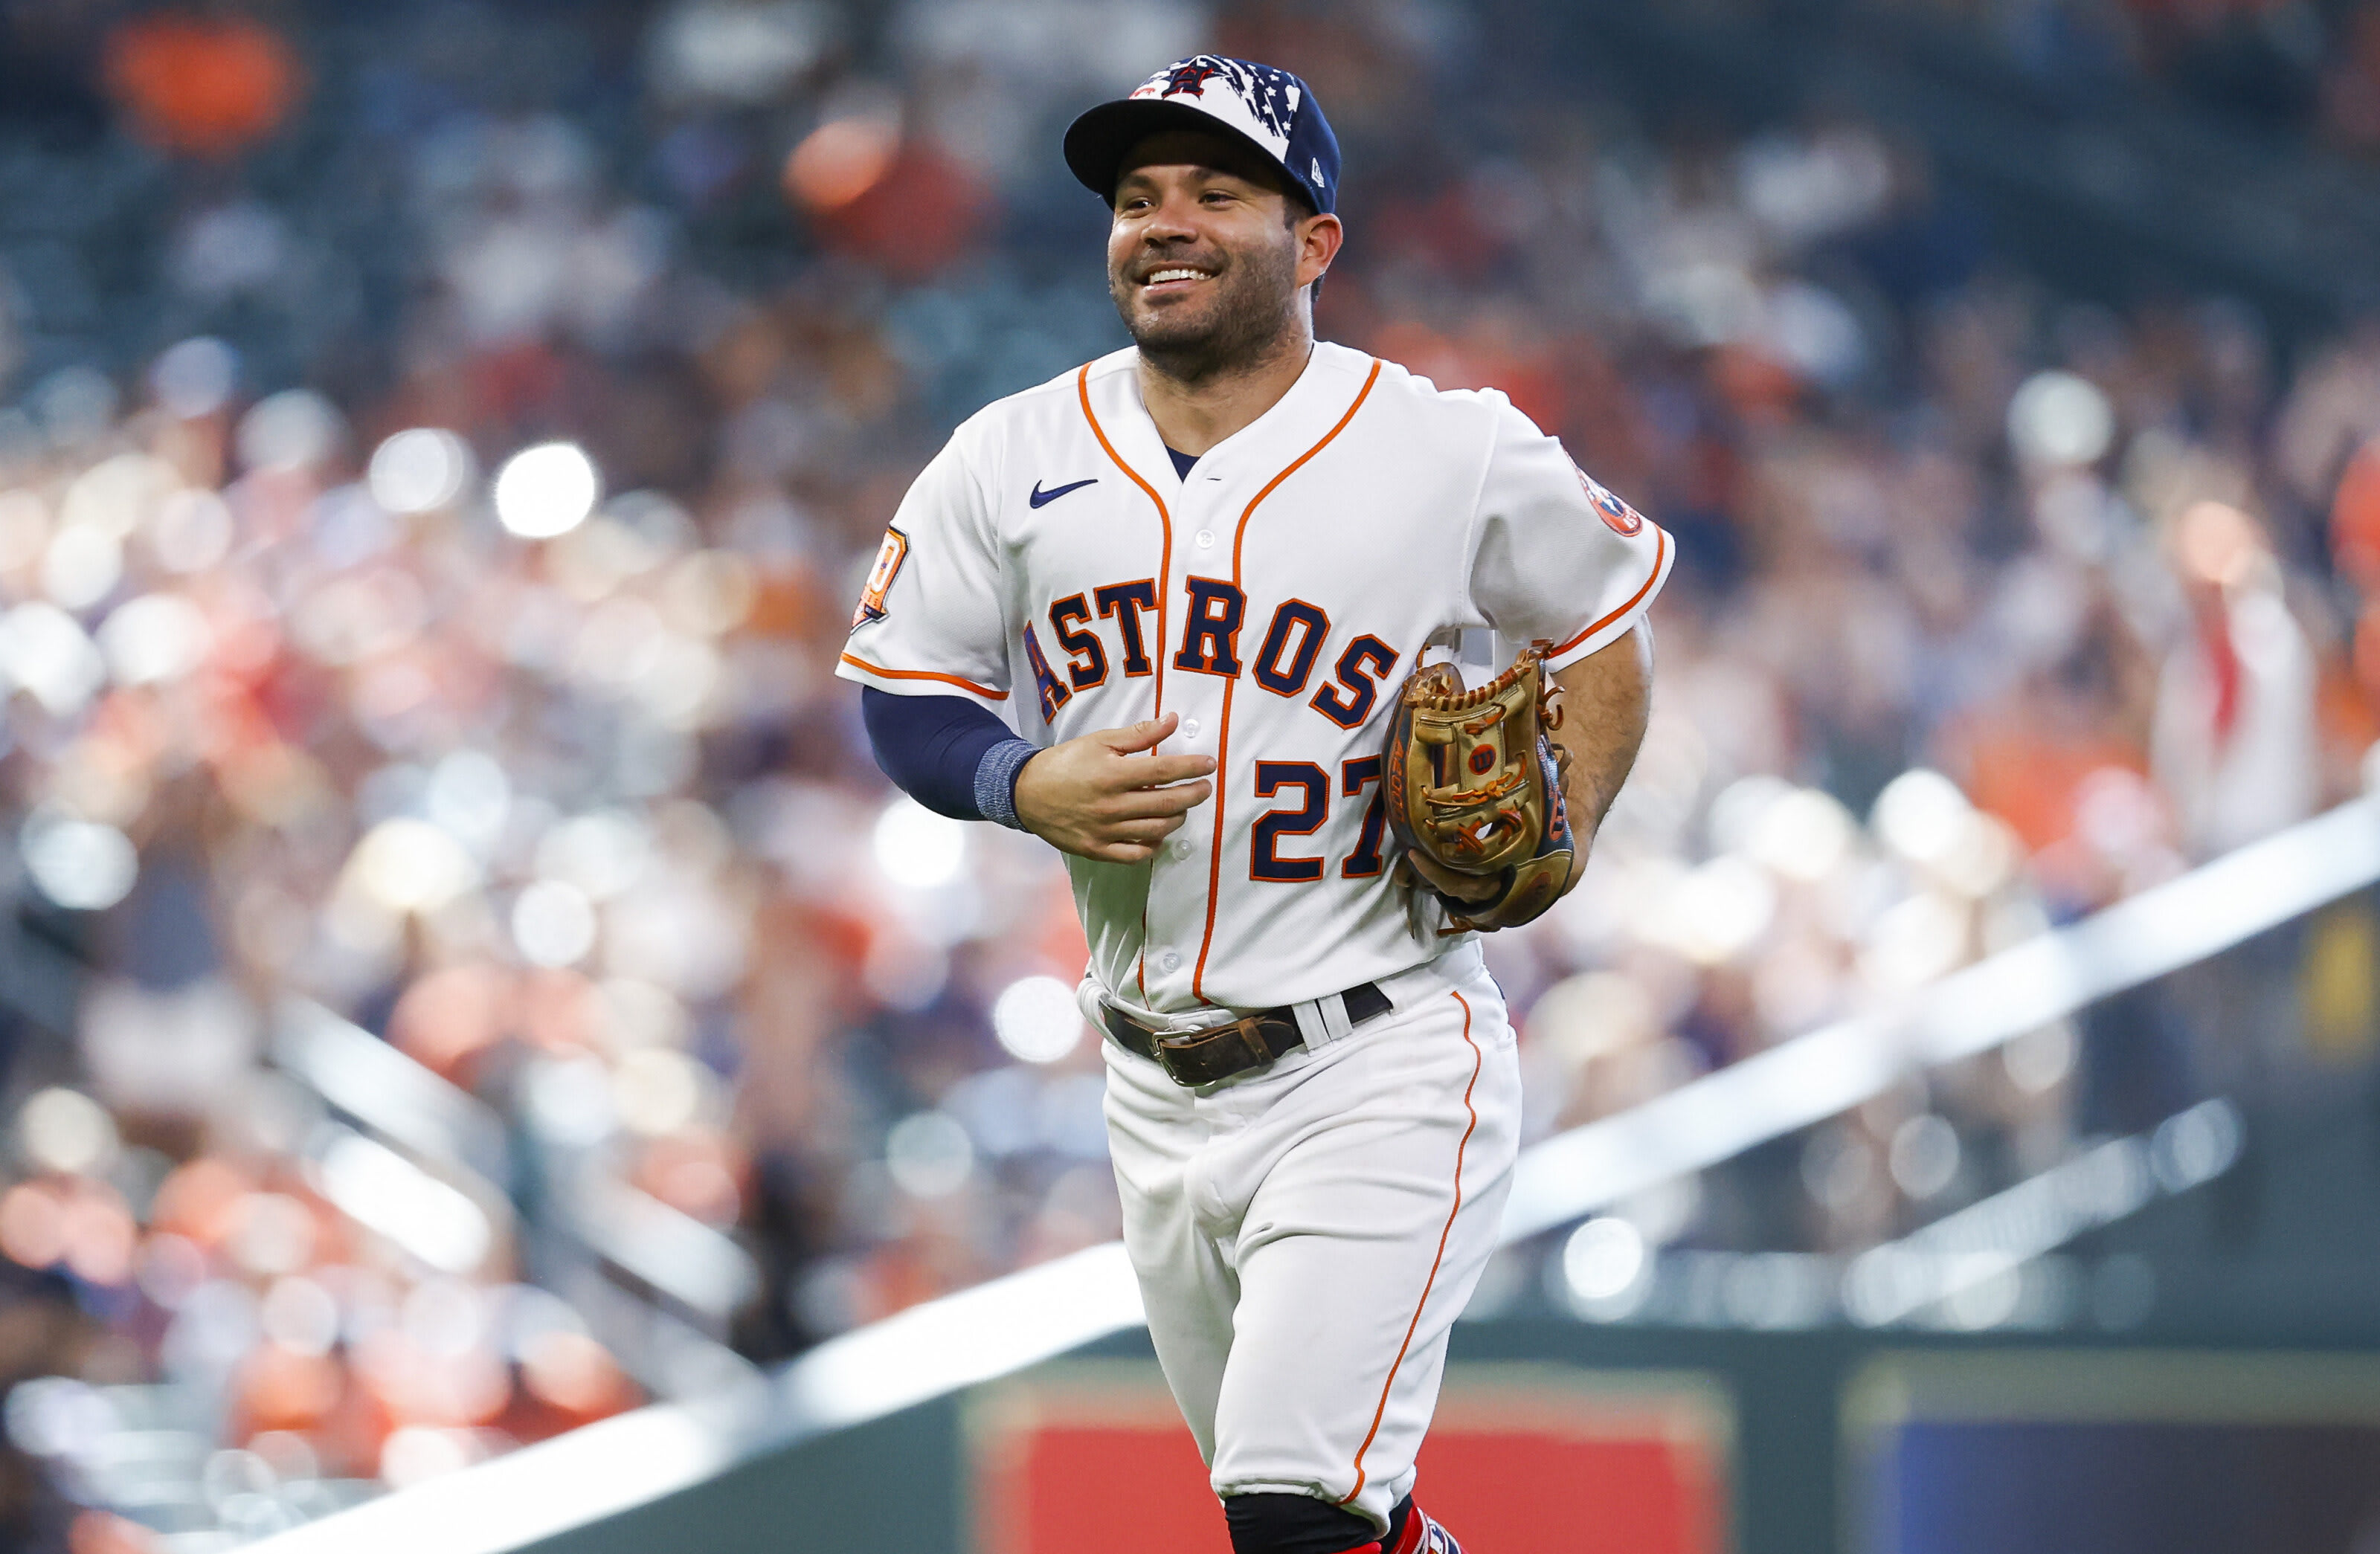 MLB Opening Day matchups feature Astros vs. White Sox